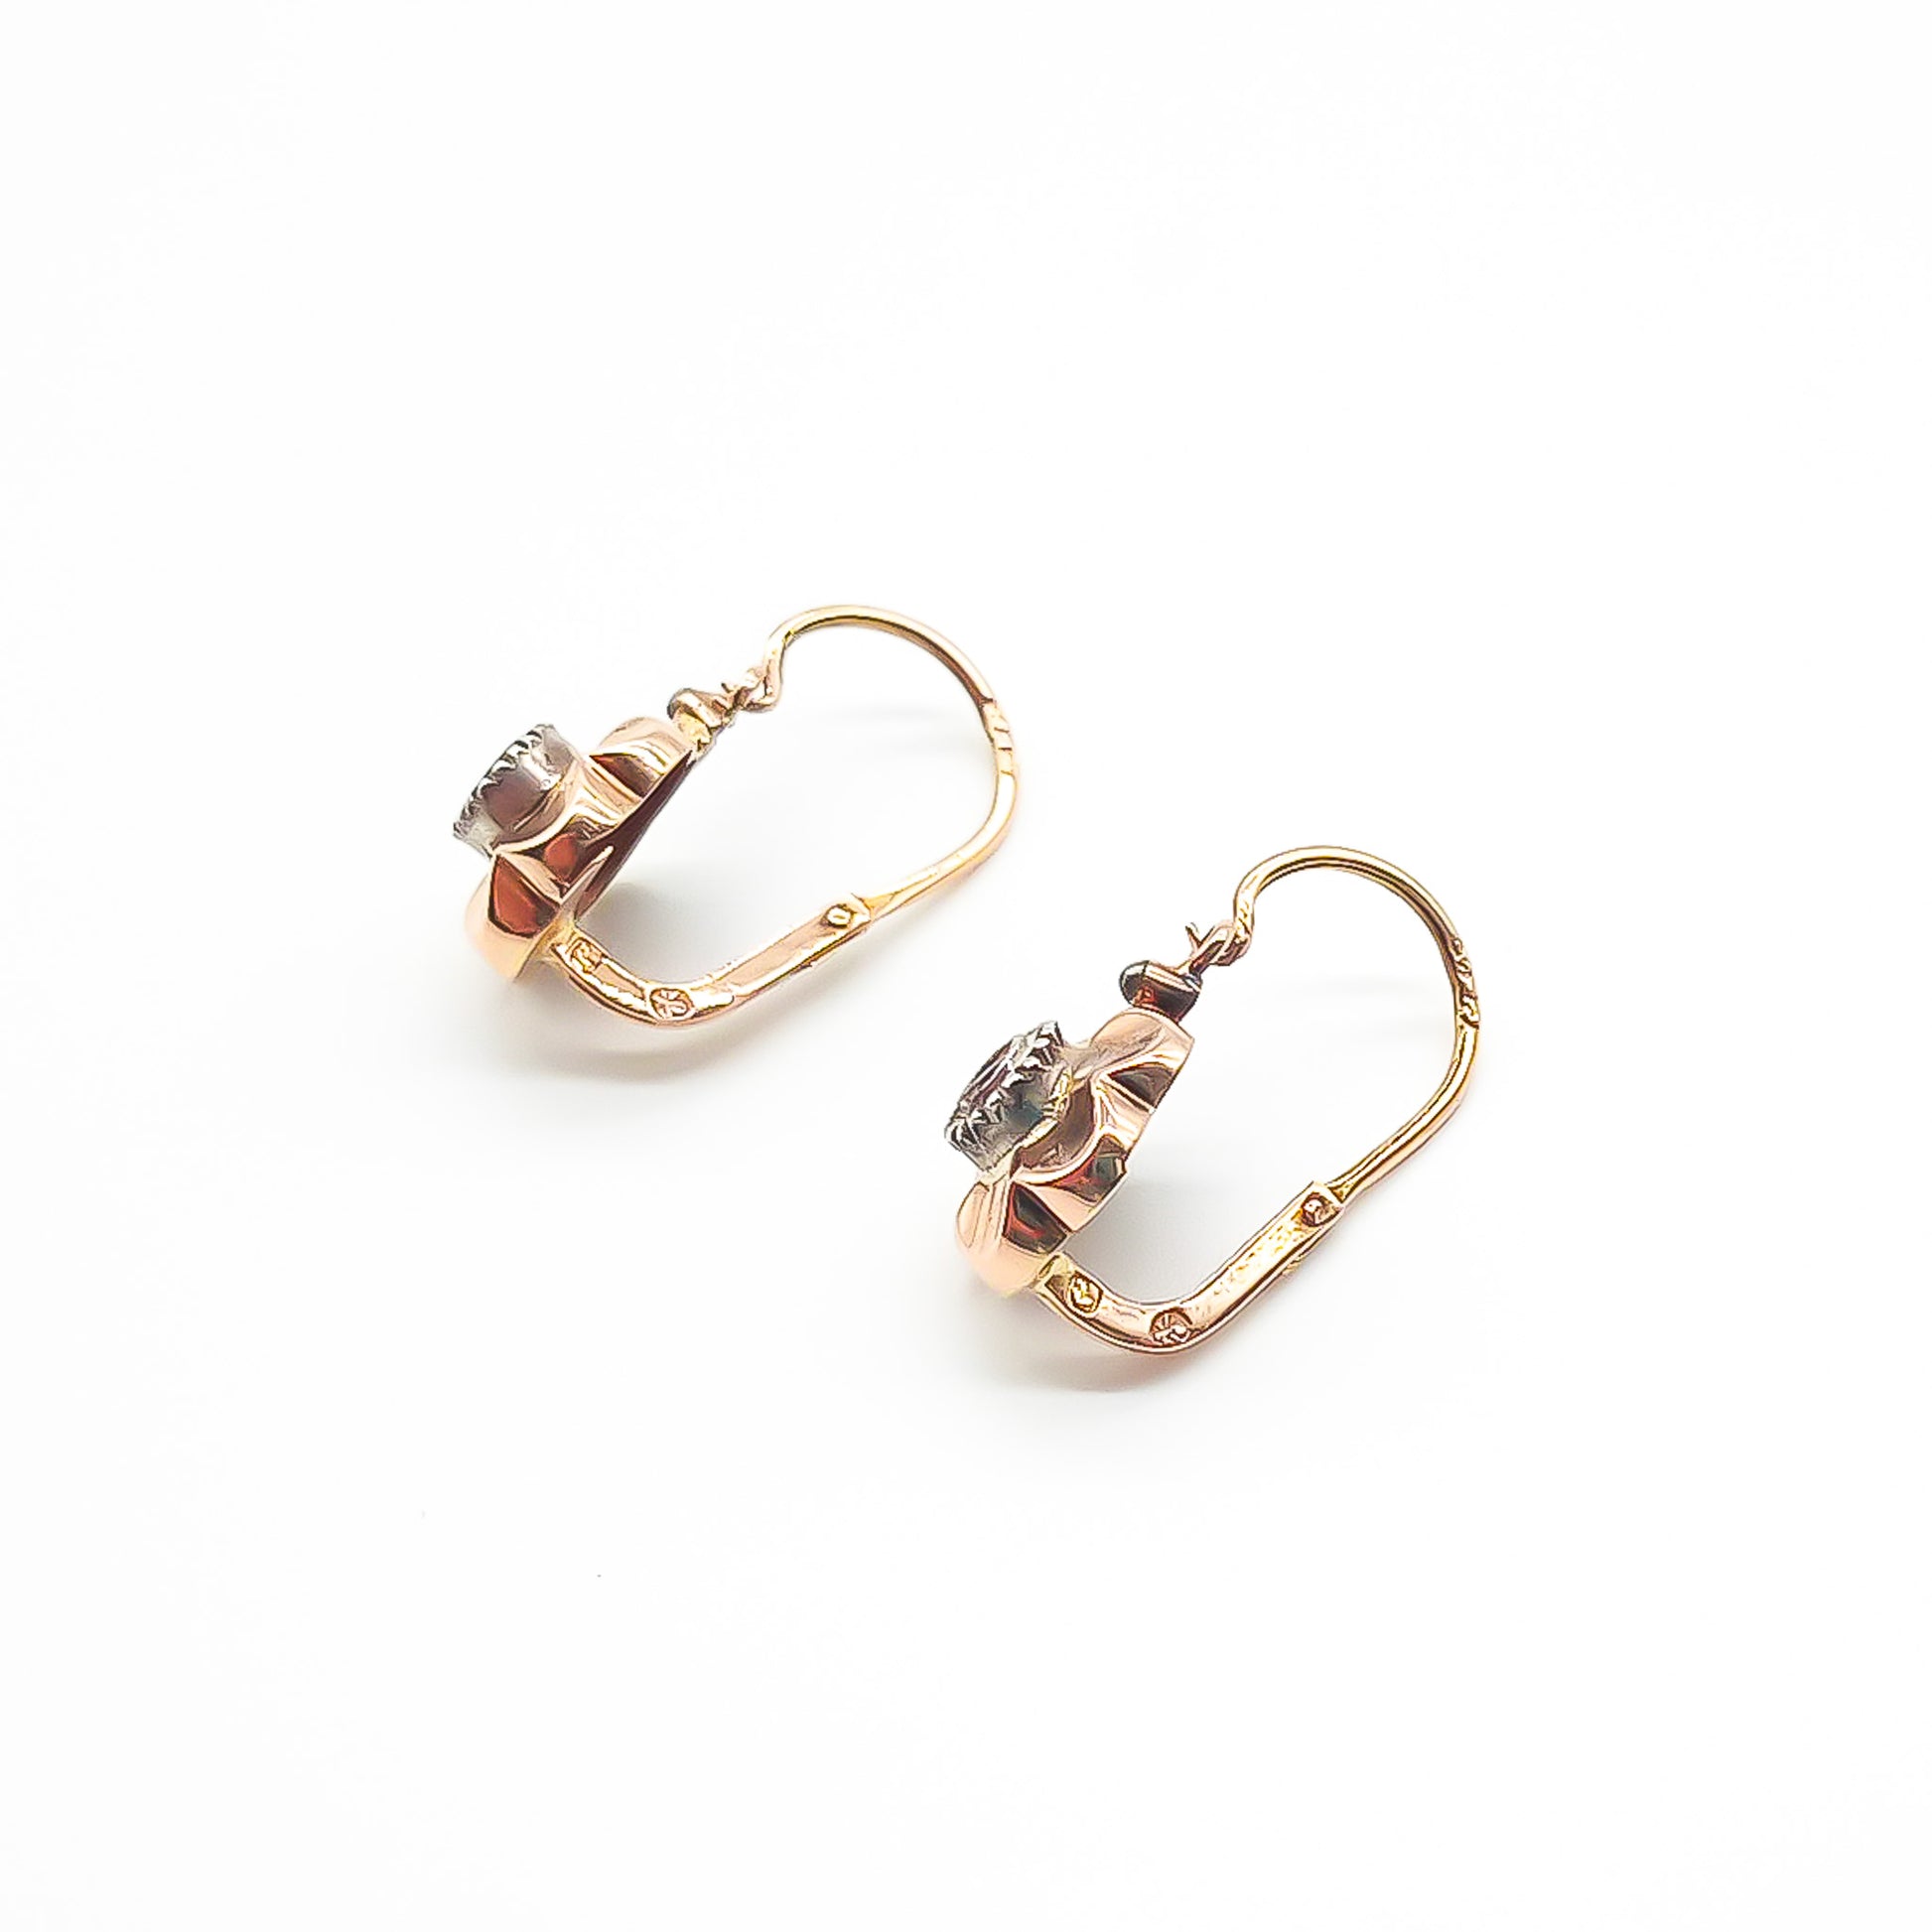 Delicate 19ct rose gold flower drop earrings, each set with a single small diamond in a silver tube setting. Portuguese